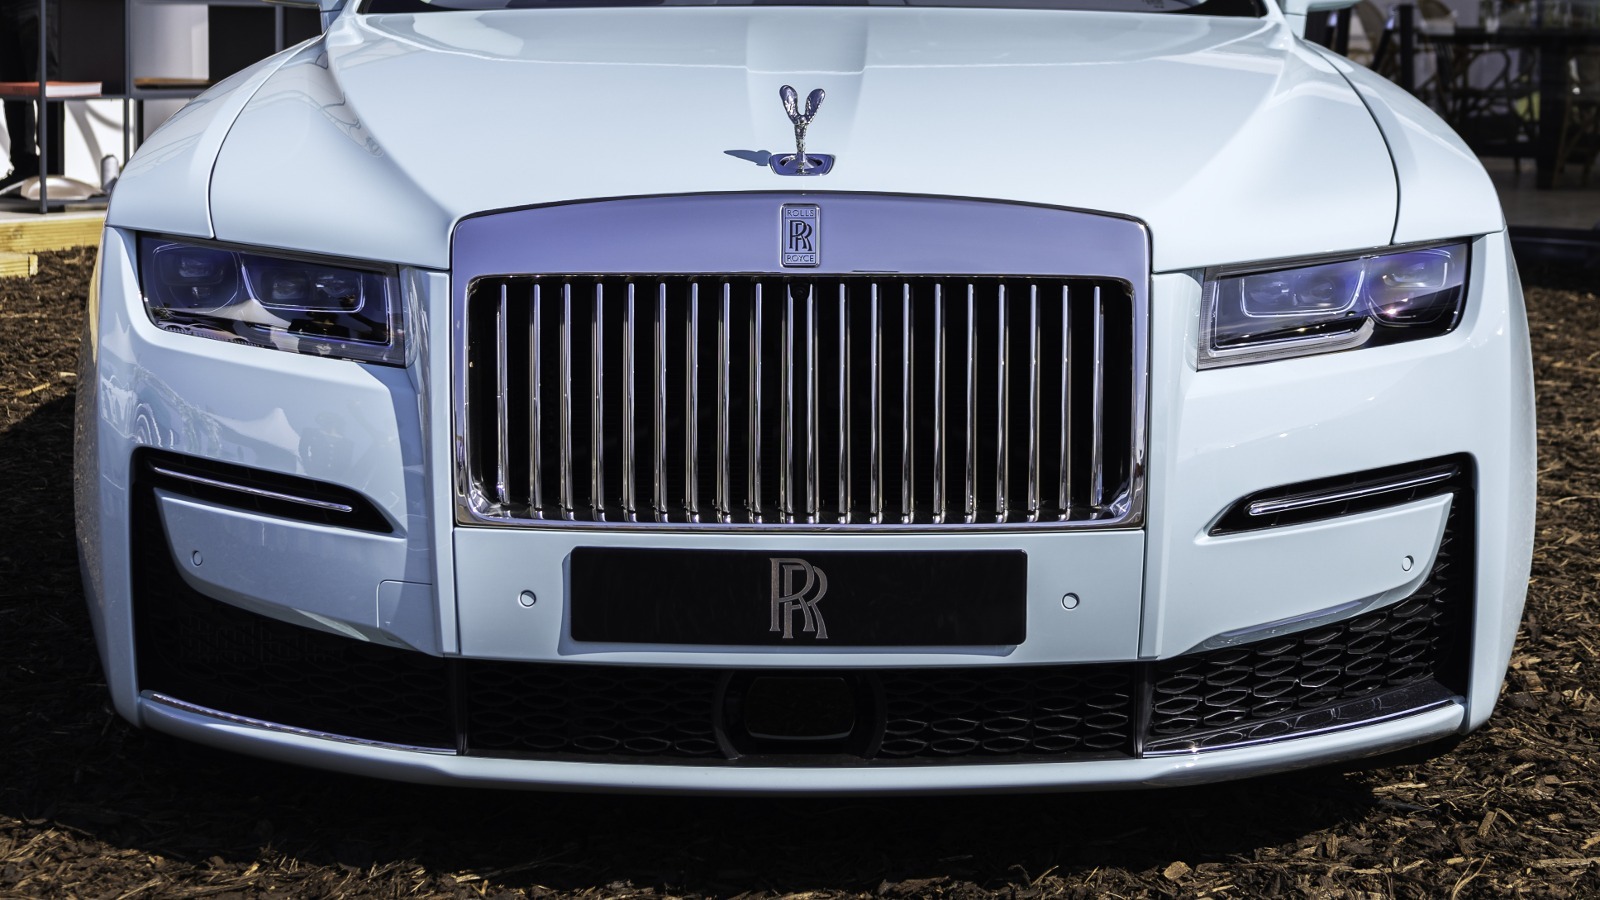 Expanding its manufacturing will enable Rolls-Royce to produce cars at a slower pace.